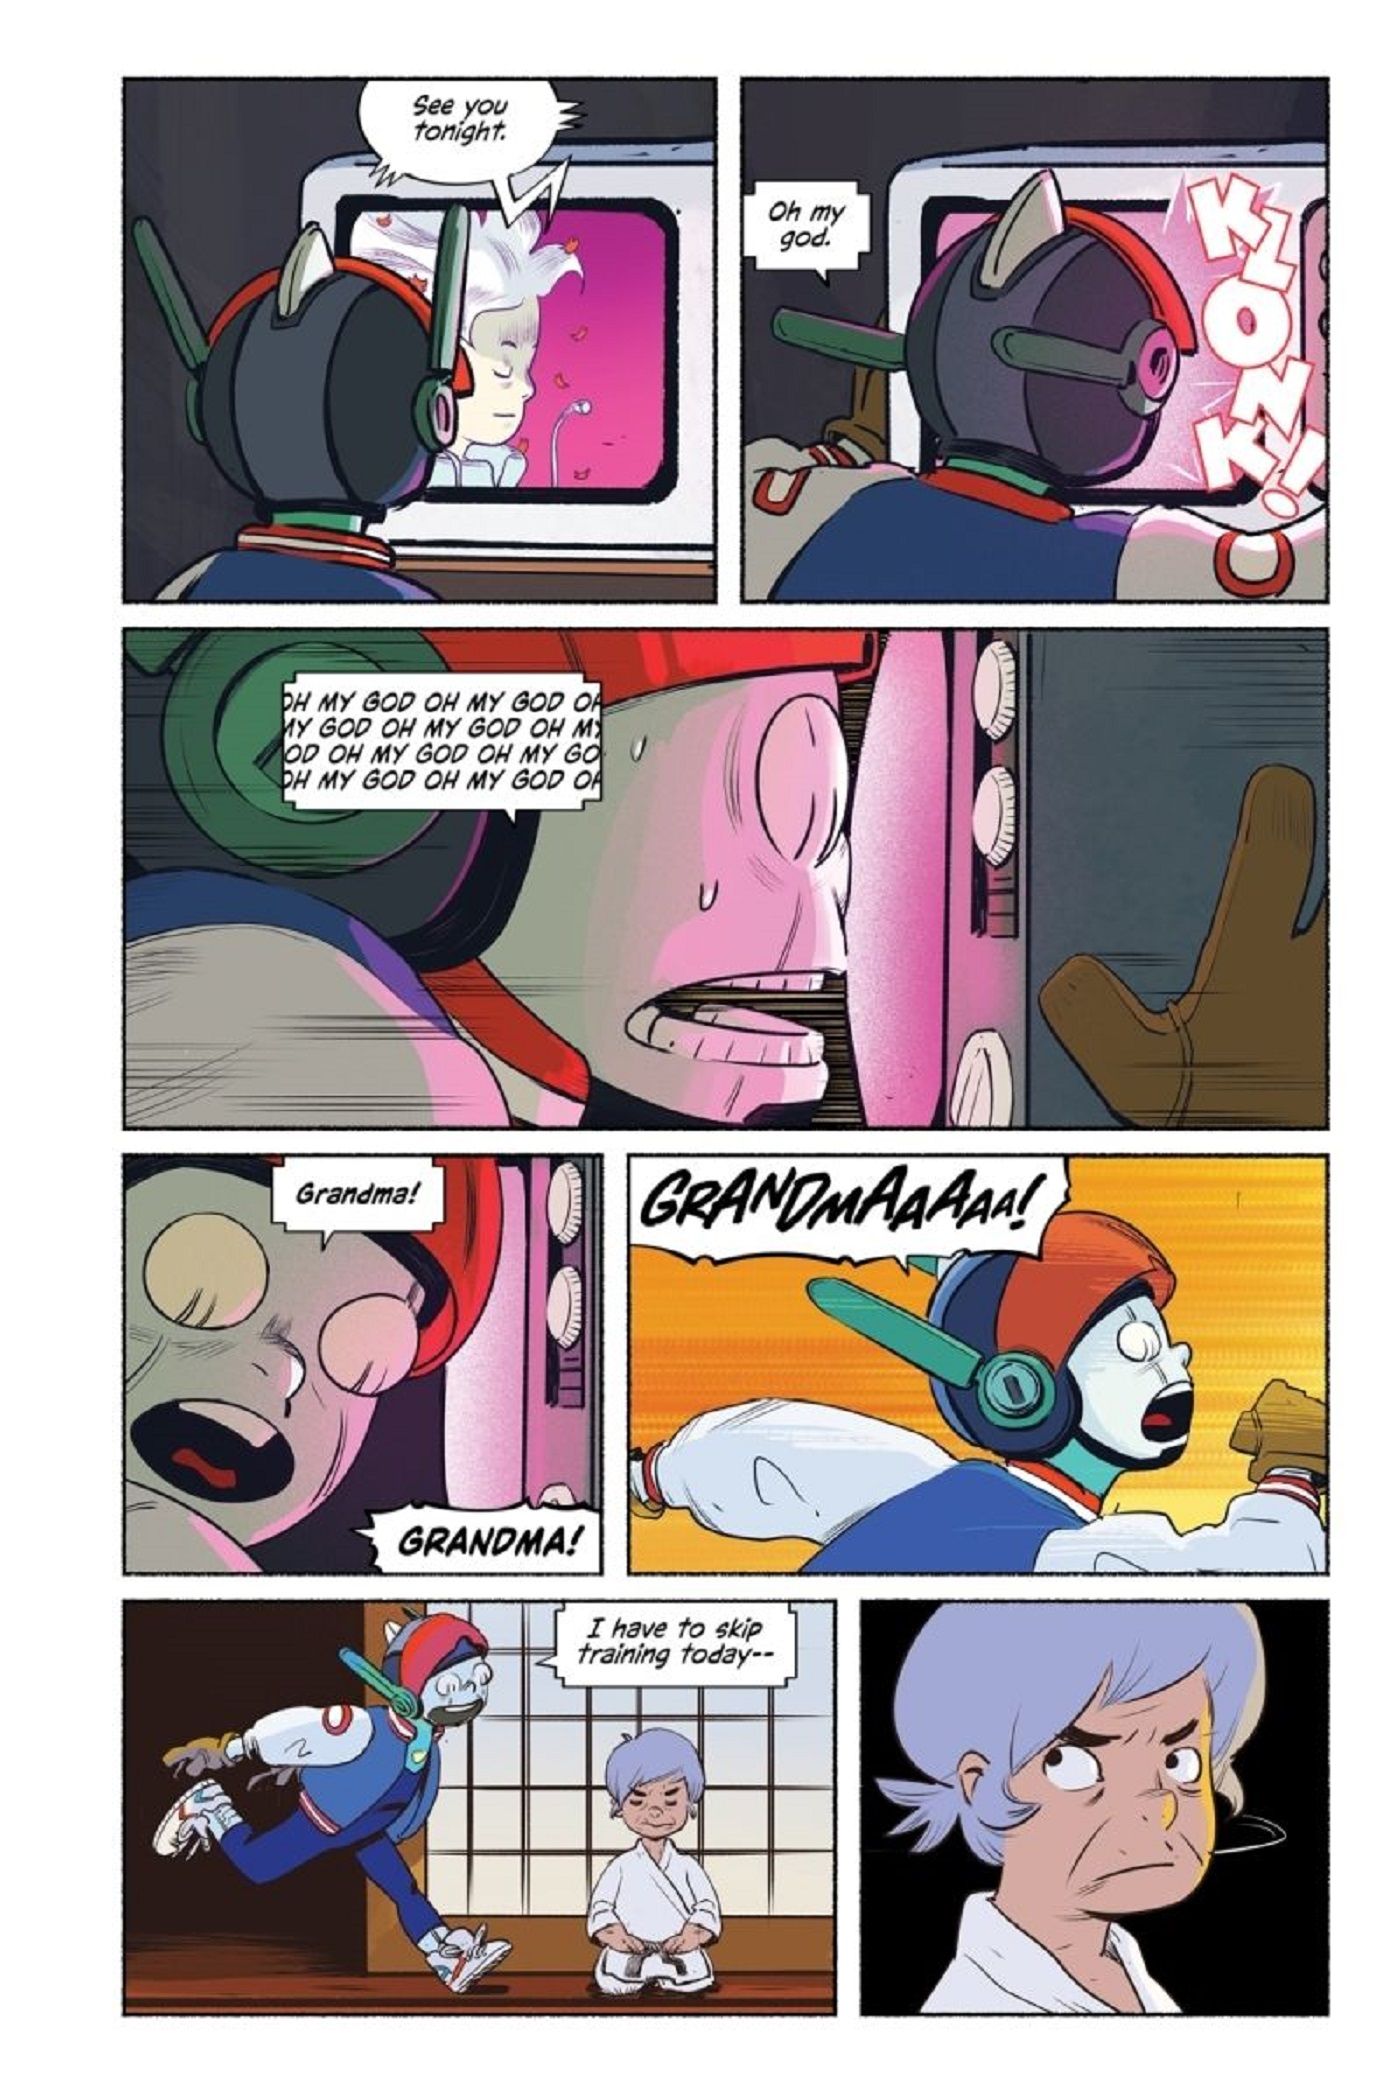 Everyday Hero Machine Boy OGN Preview Page 3